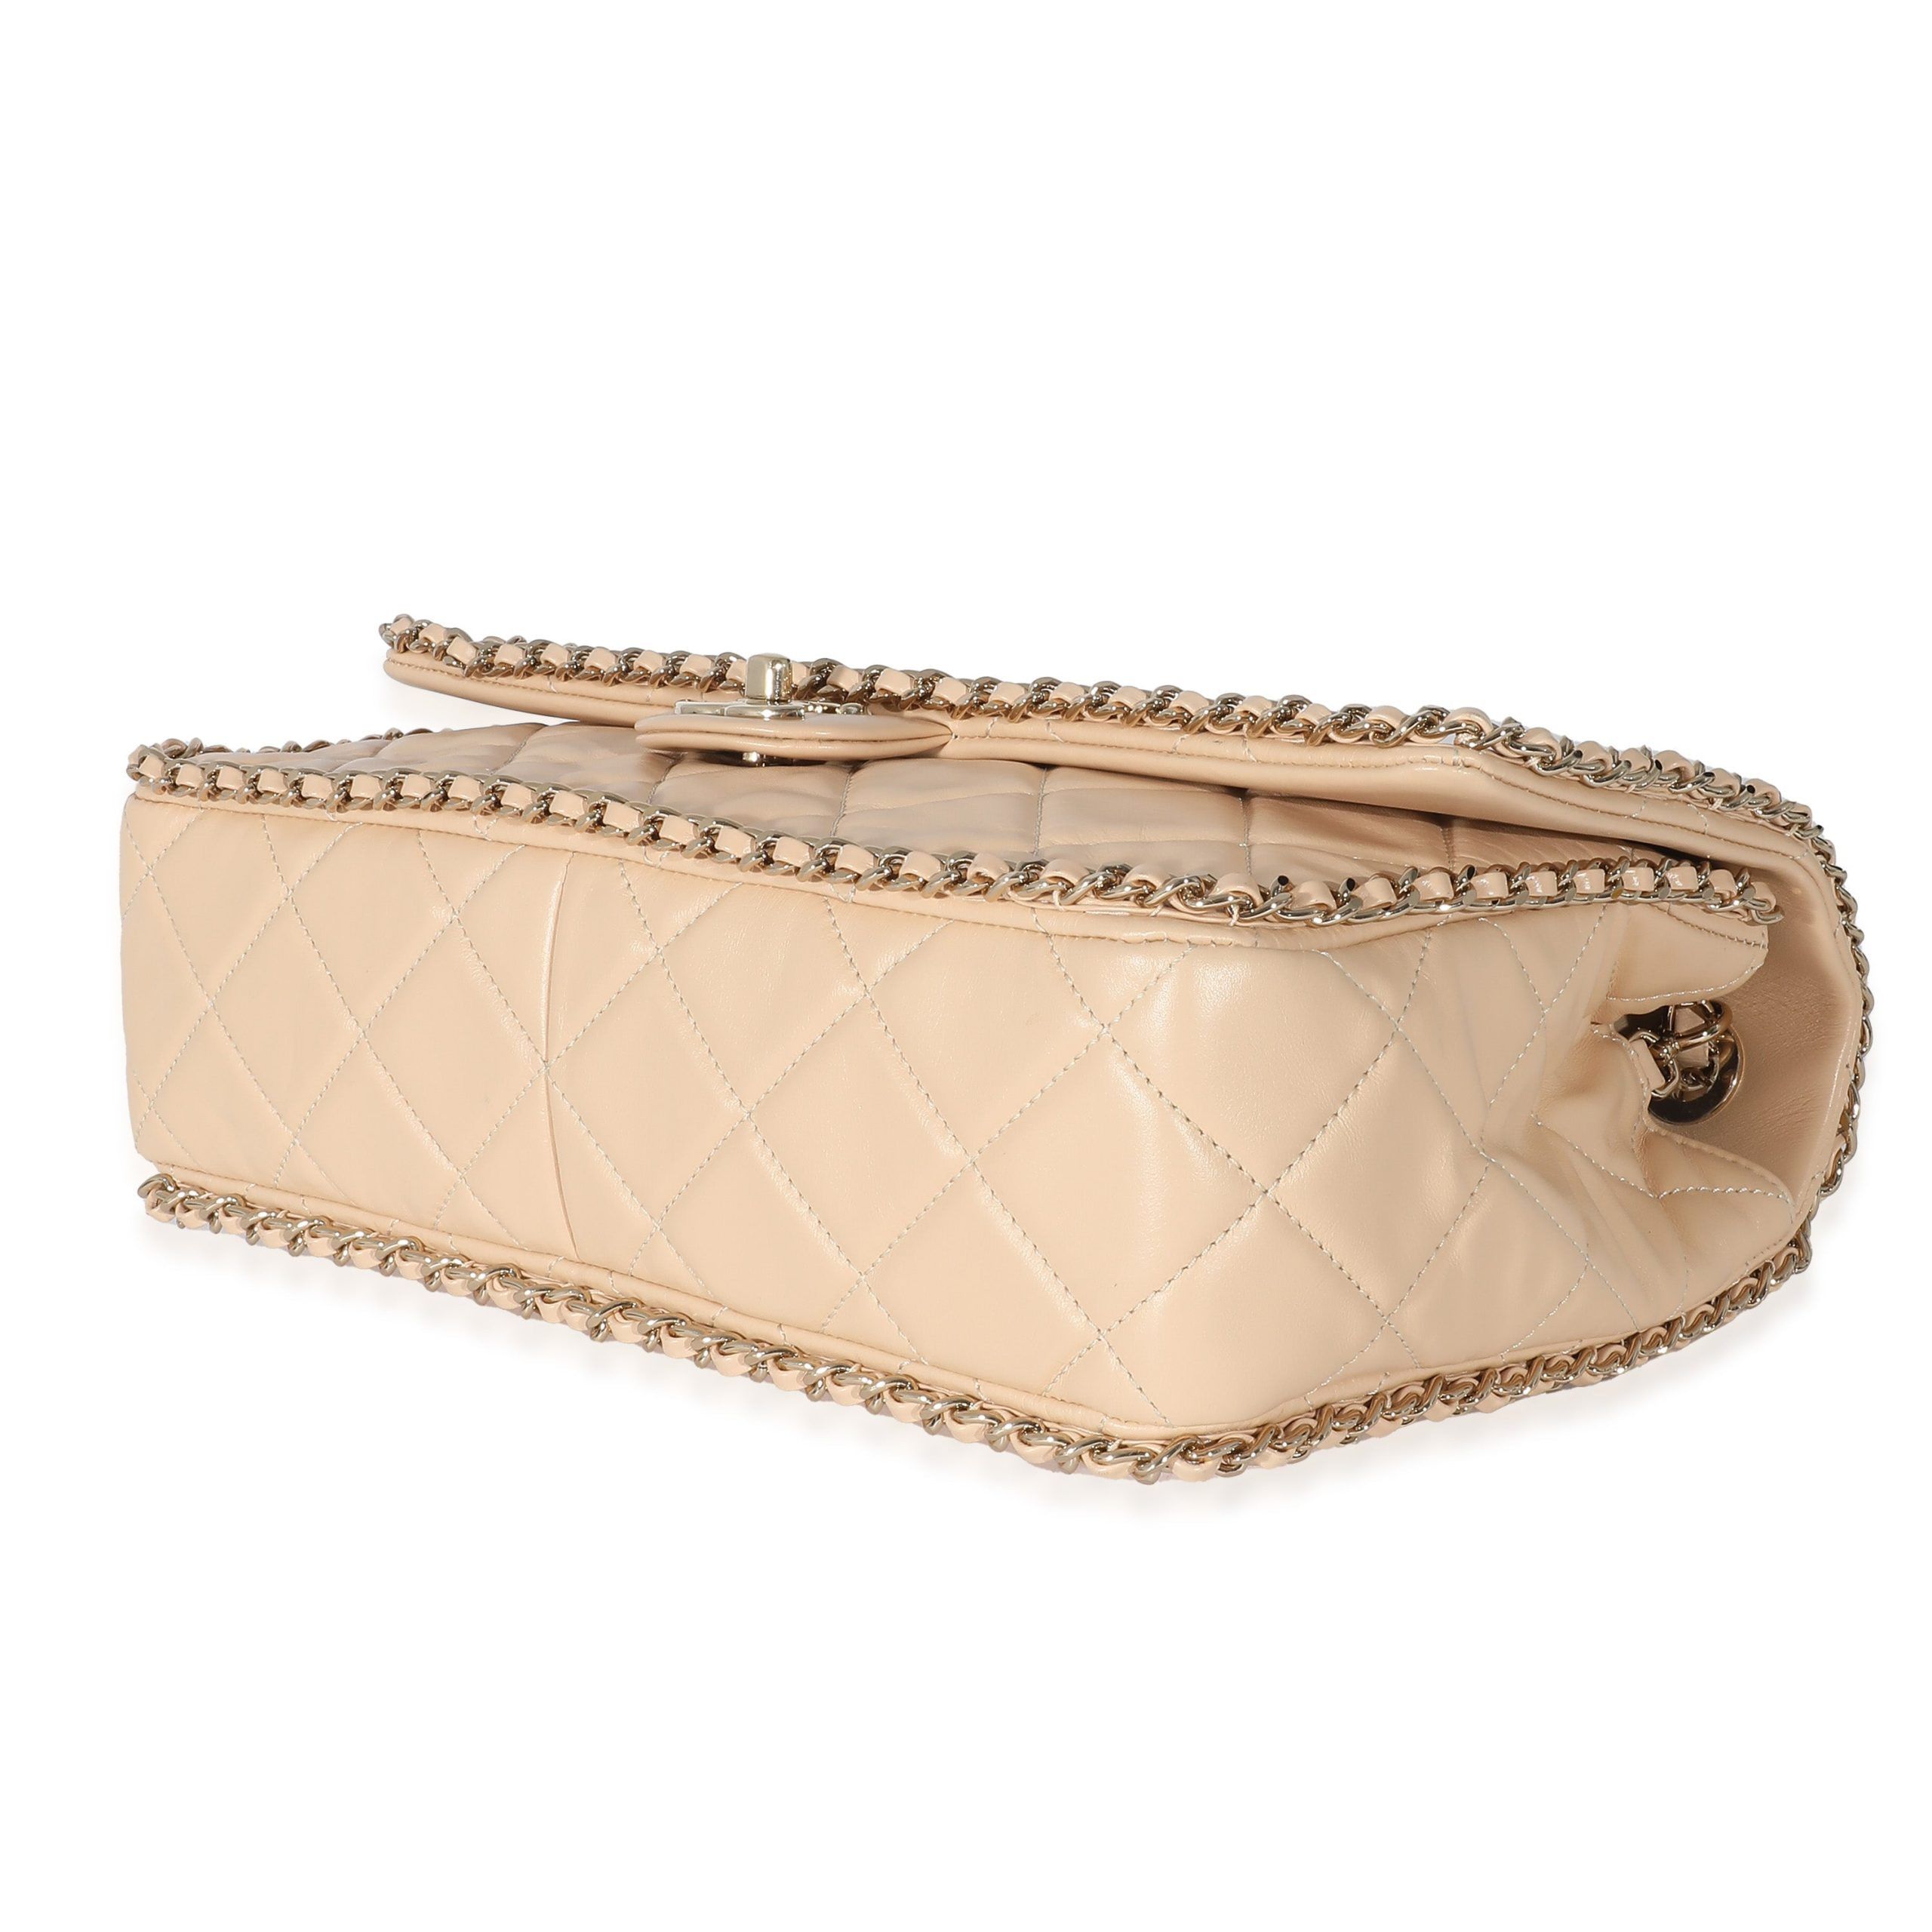 Chanel Chanel Beige Crumpled Calfskin Medium Chain All Over Flap Bag Size ONE SIZE - 5 Thumbnail